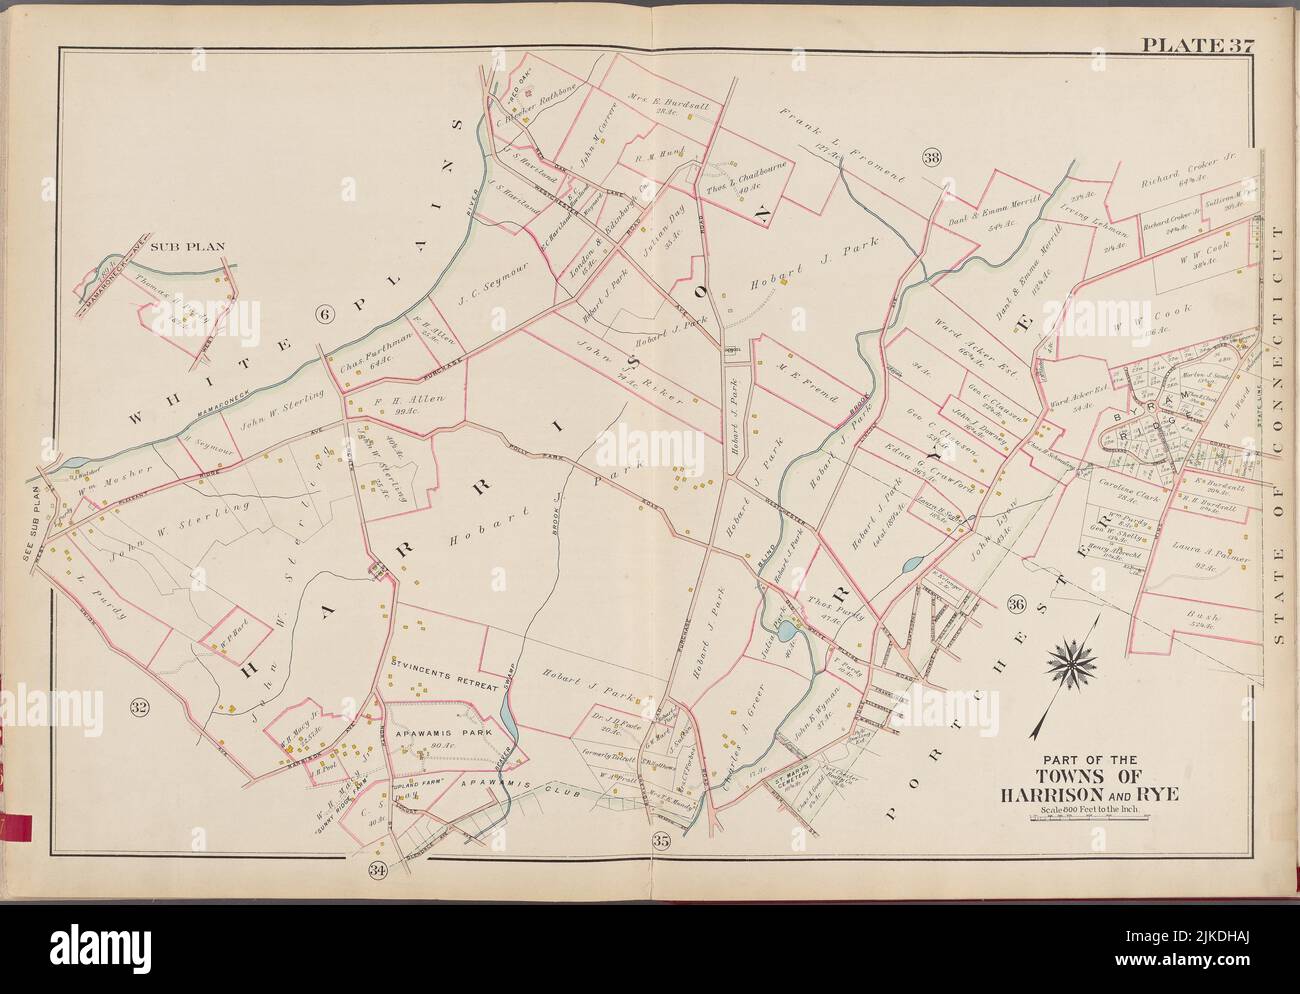 Westchester, V. 1, Double Page Plate No. 37 [Map bounded by White Plains, Ring St., Port Chester, Clendale Ave., Union Ave.]. G.W. Bromley & Co. Stock Photo